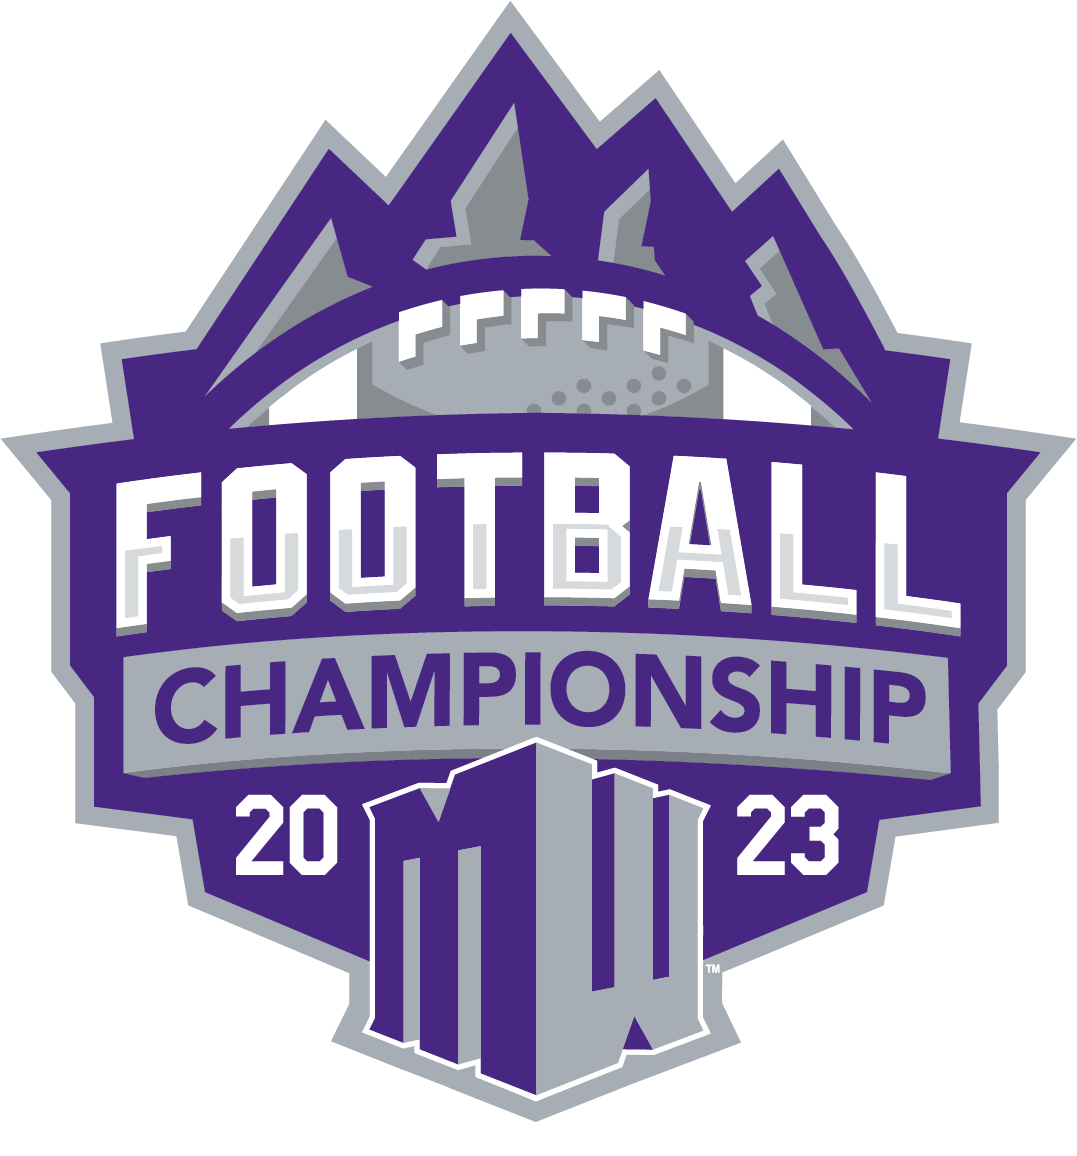 Football Championship Mountain West Conference